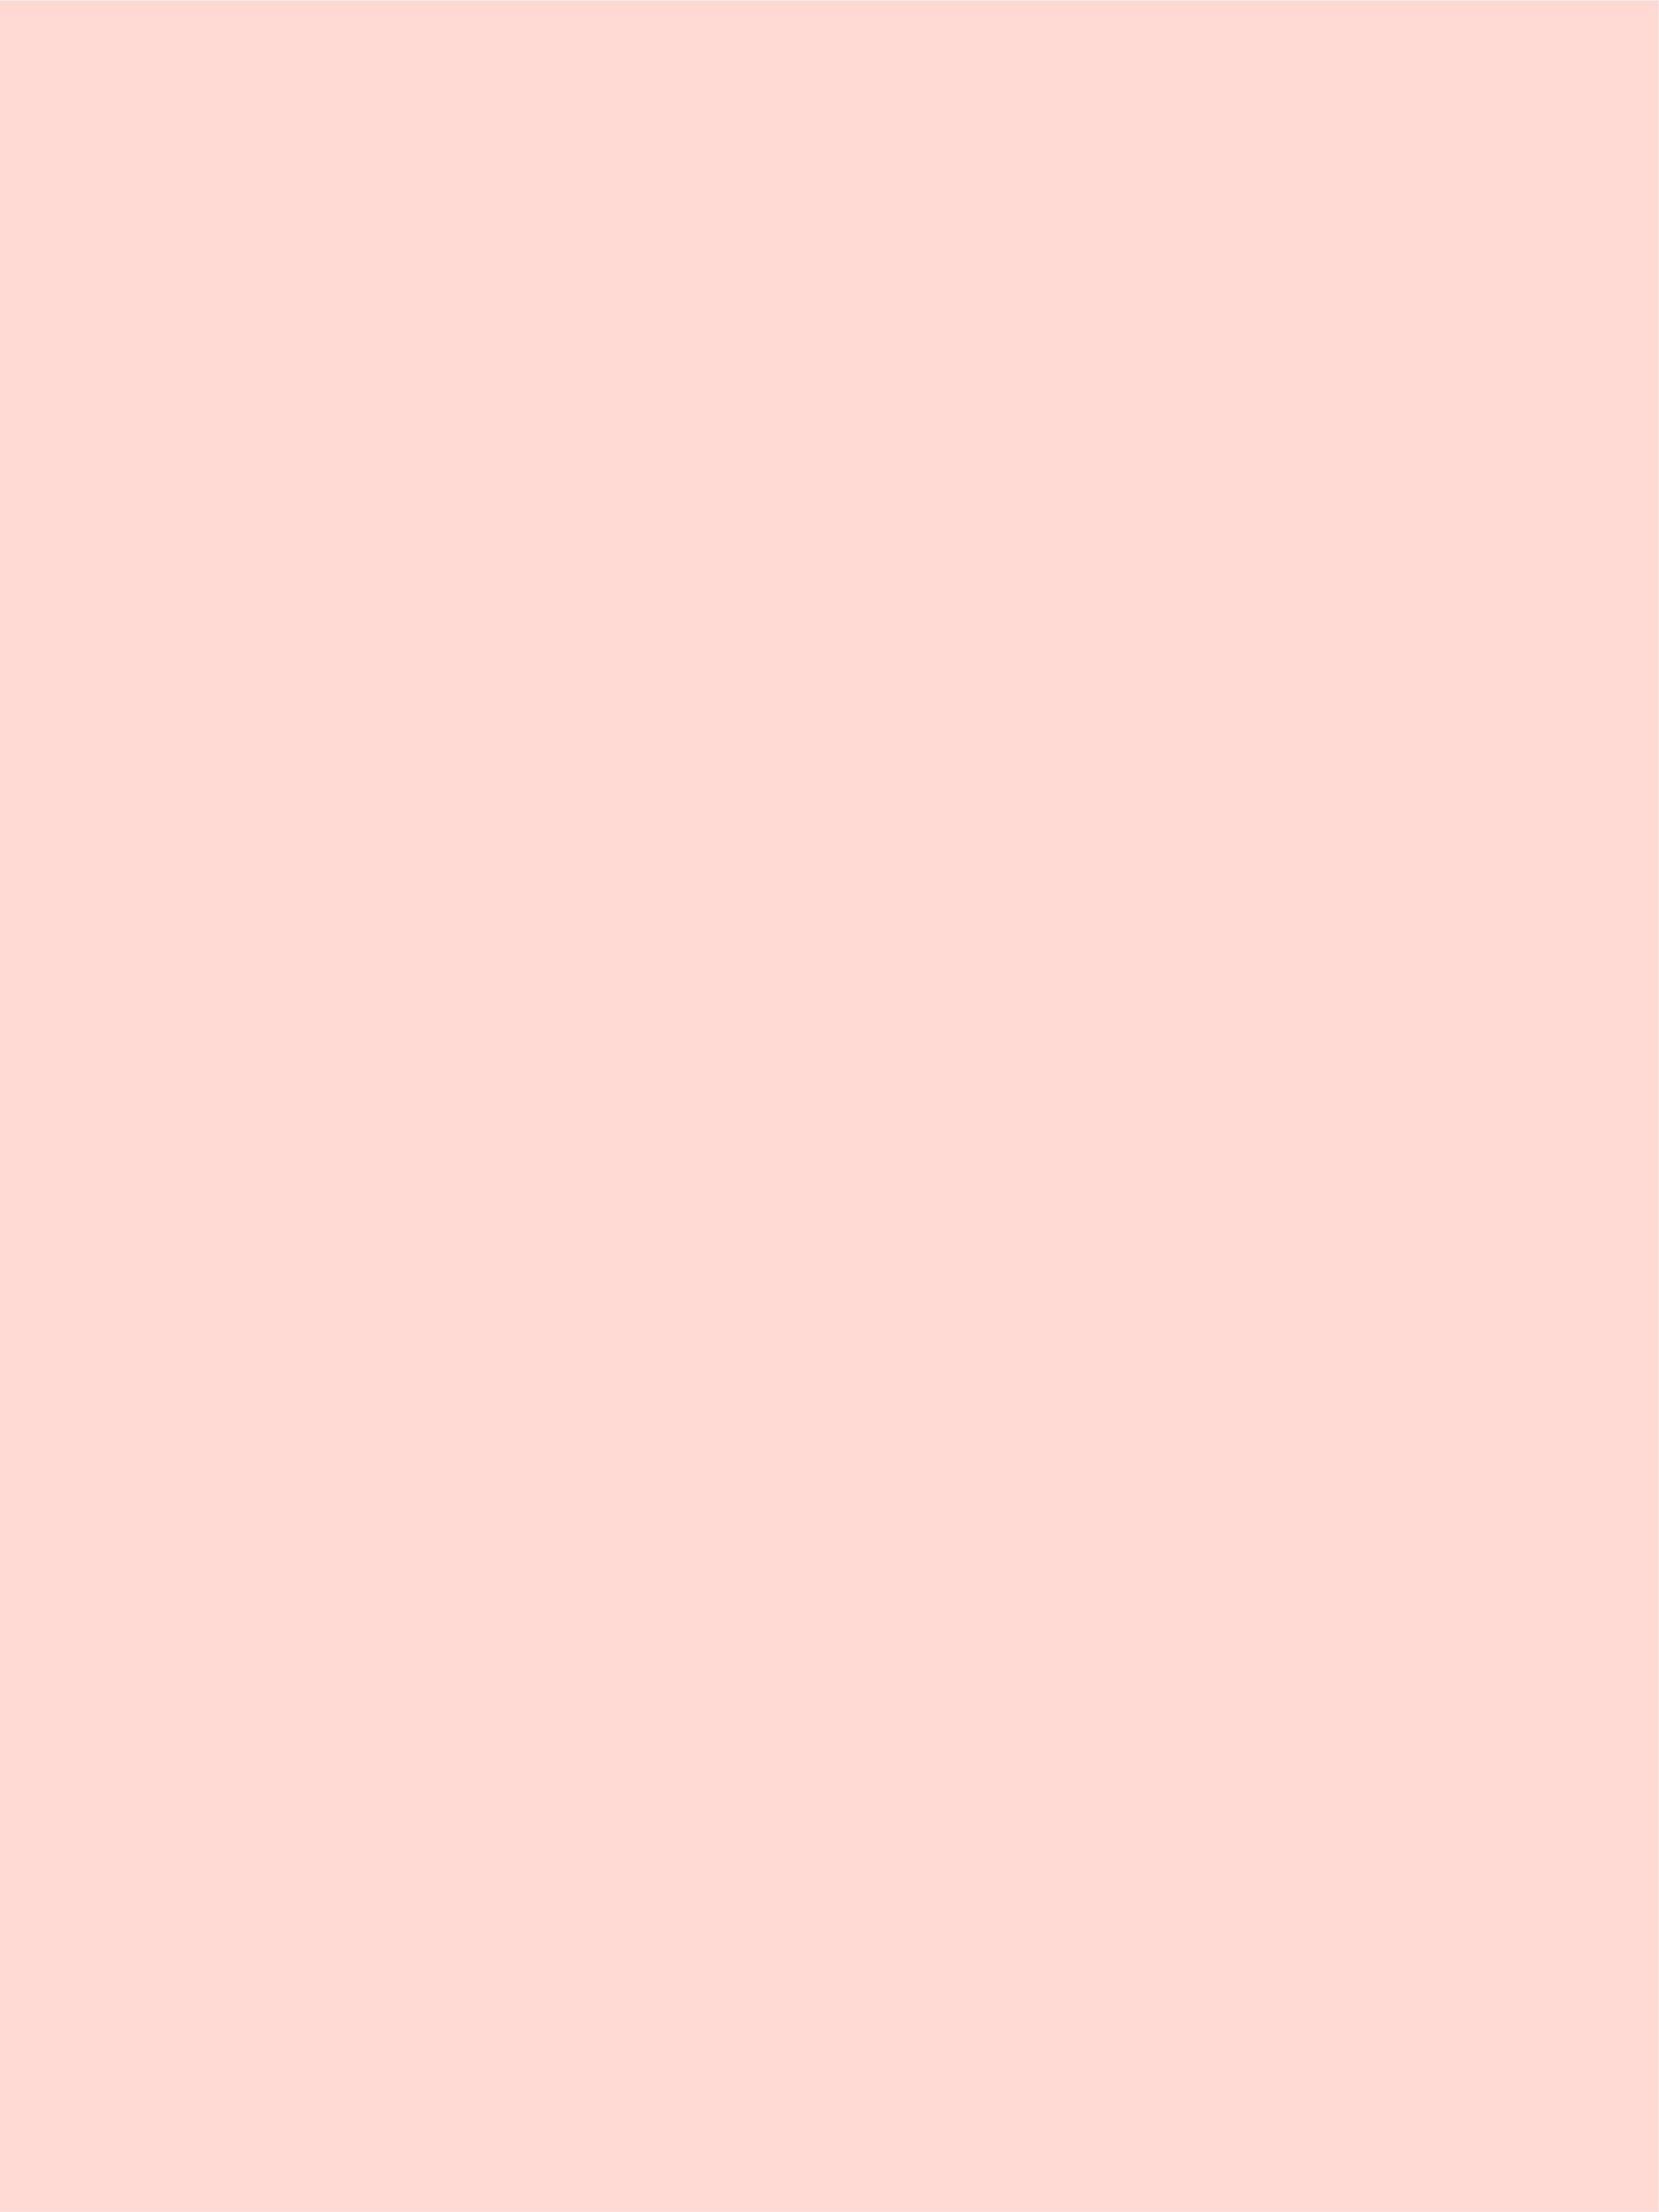 Peach Color Aesthetic Wallpapers Top Free Peach Color Aesthetic Backgrounds Wallpaperaccess